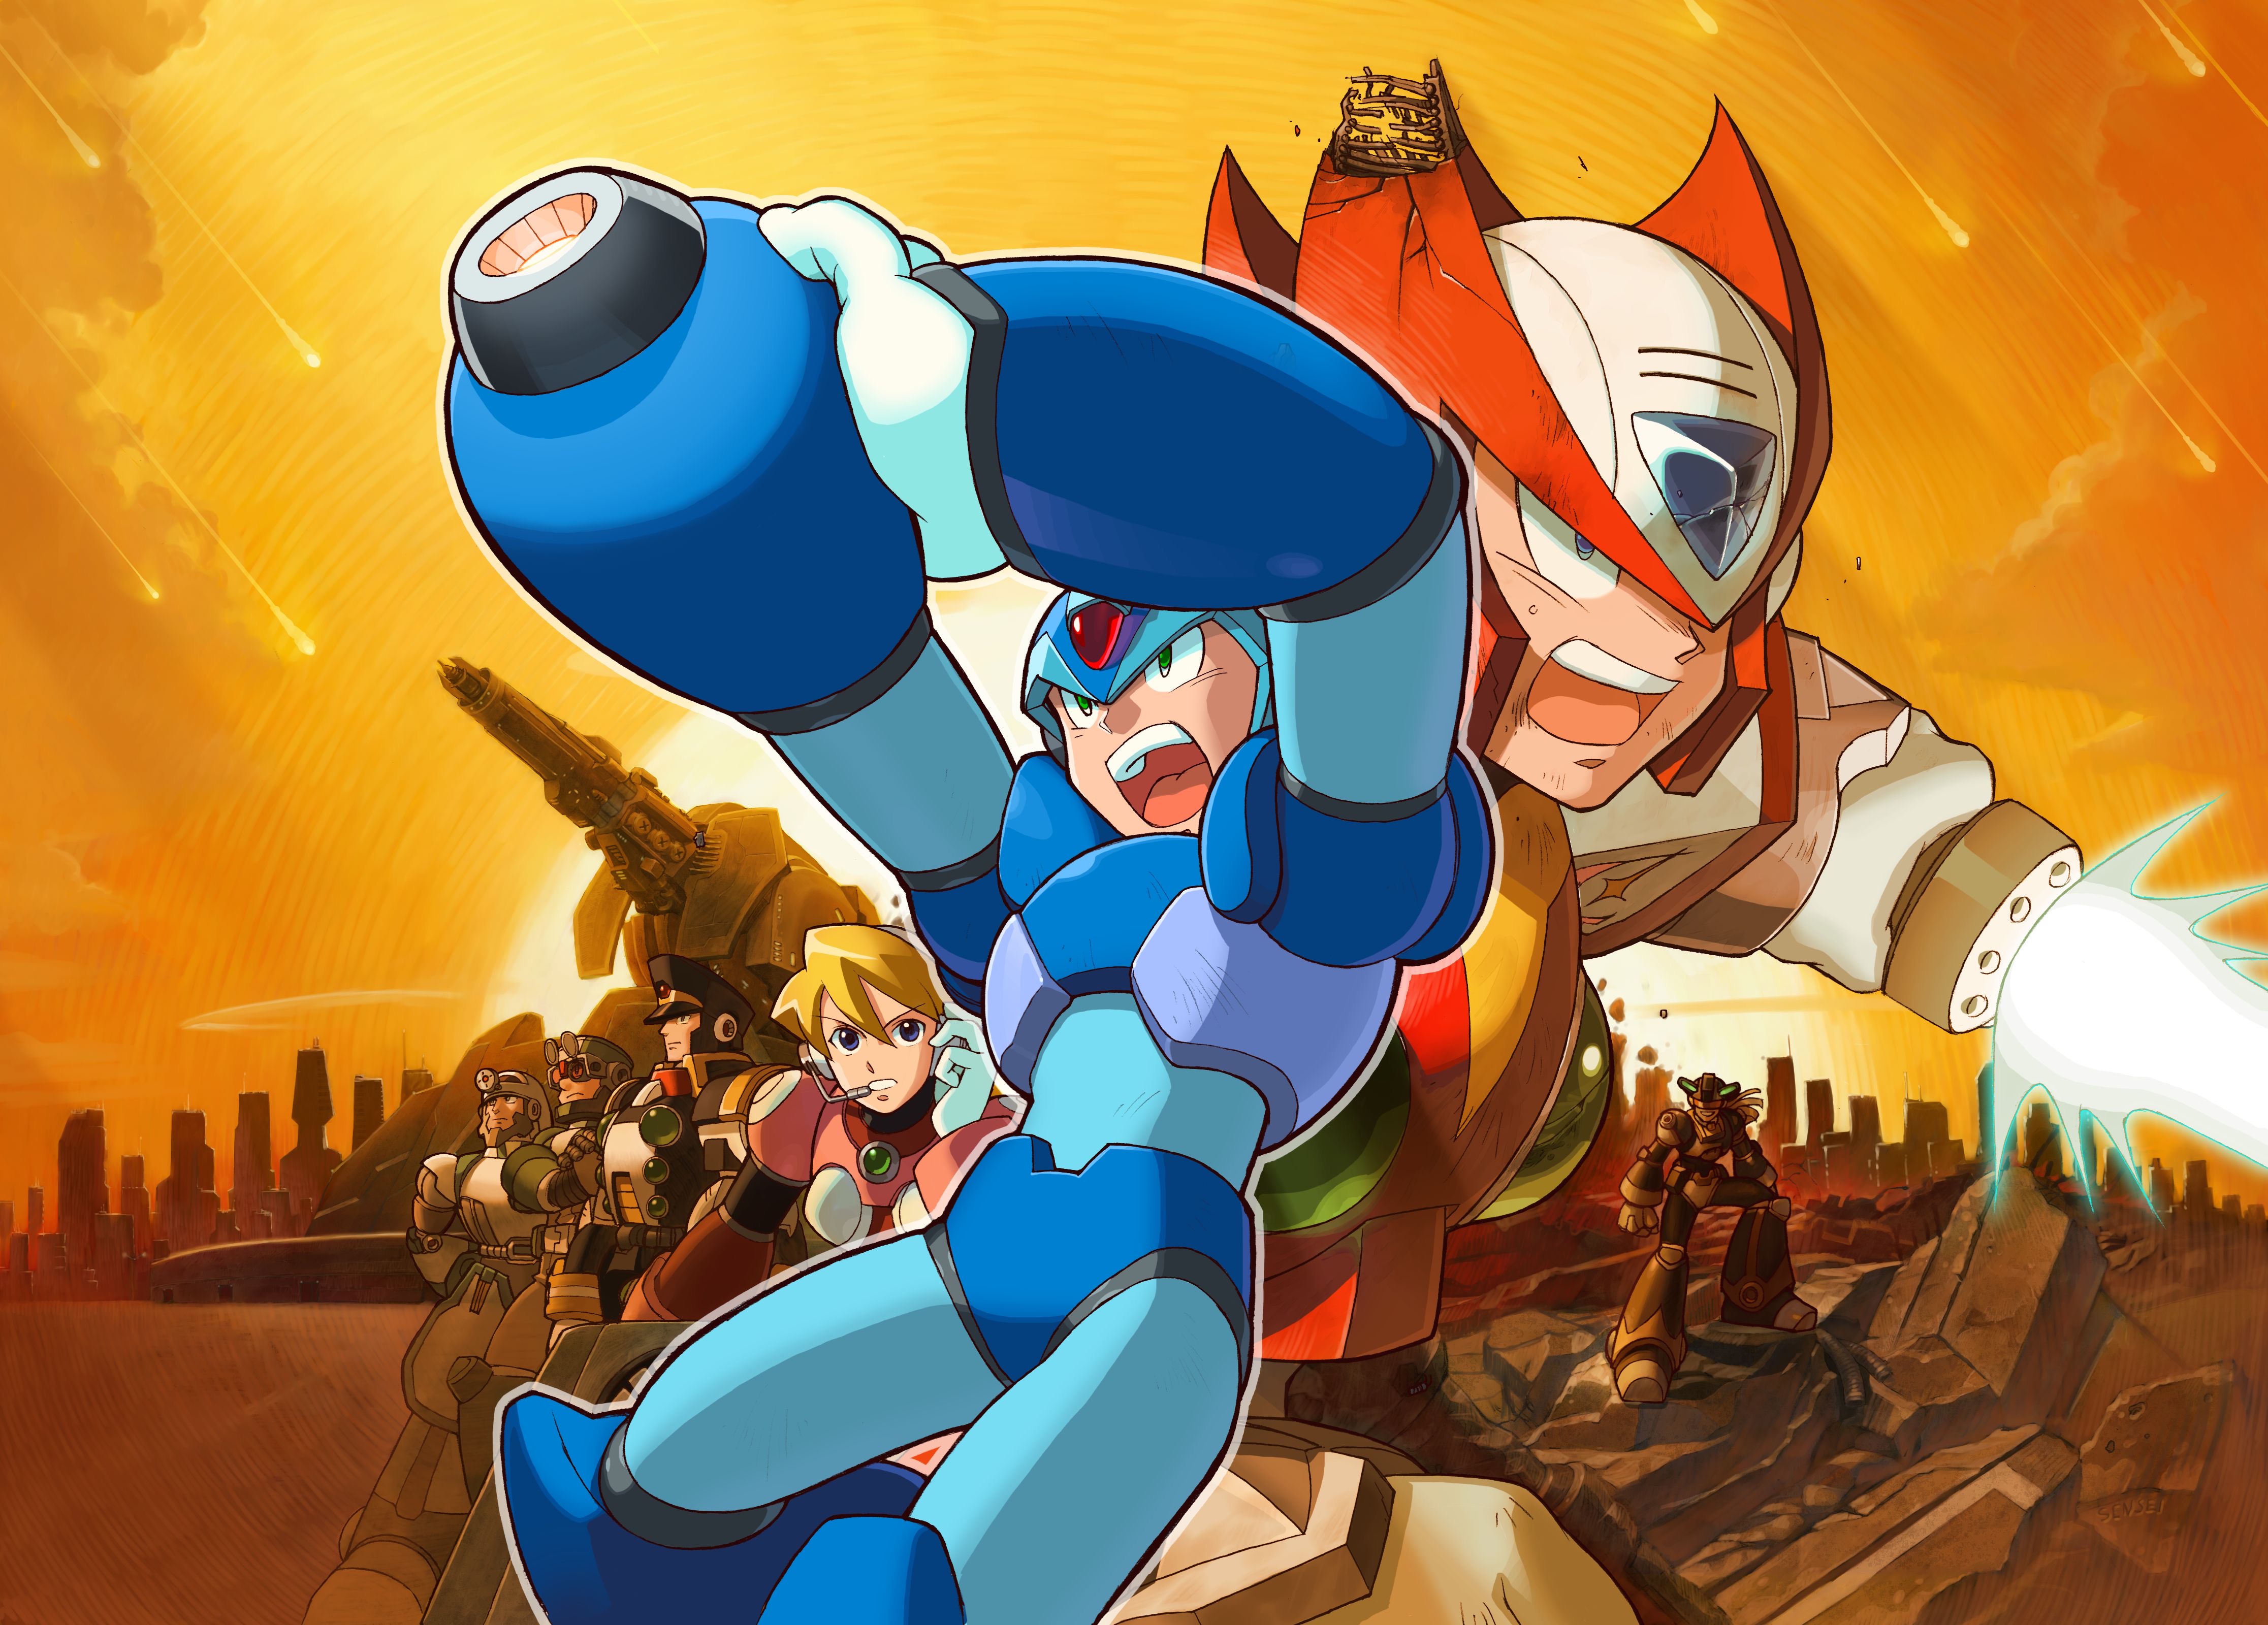 http://images4.wikia.nocookie.net/__cb20100420002541/megaman/images/a/aa/Normal_mmx5promo.jpg